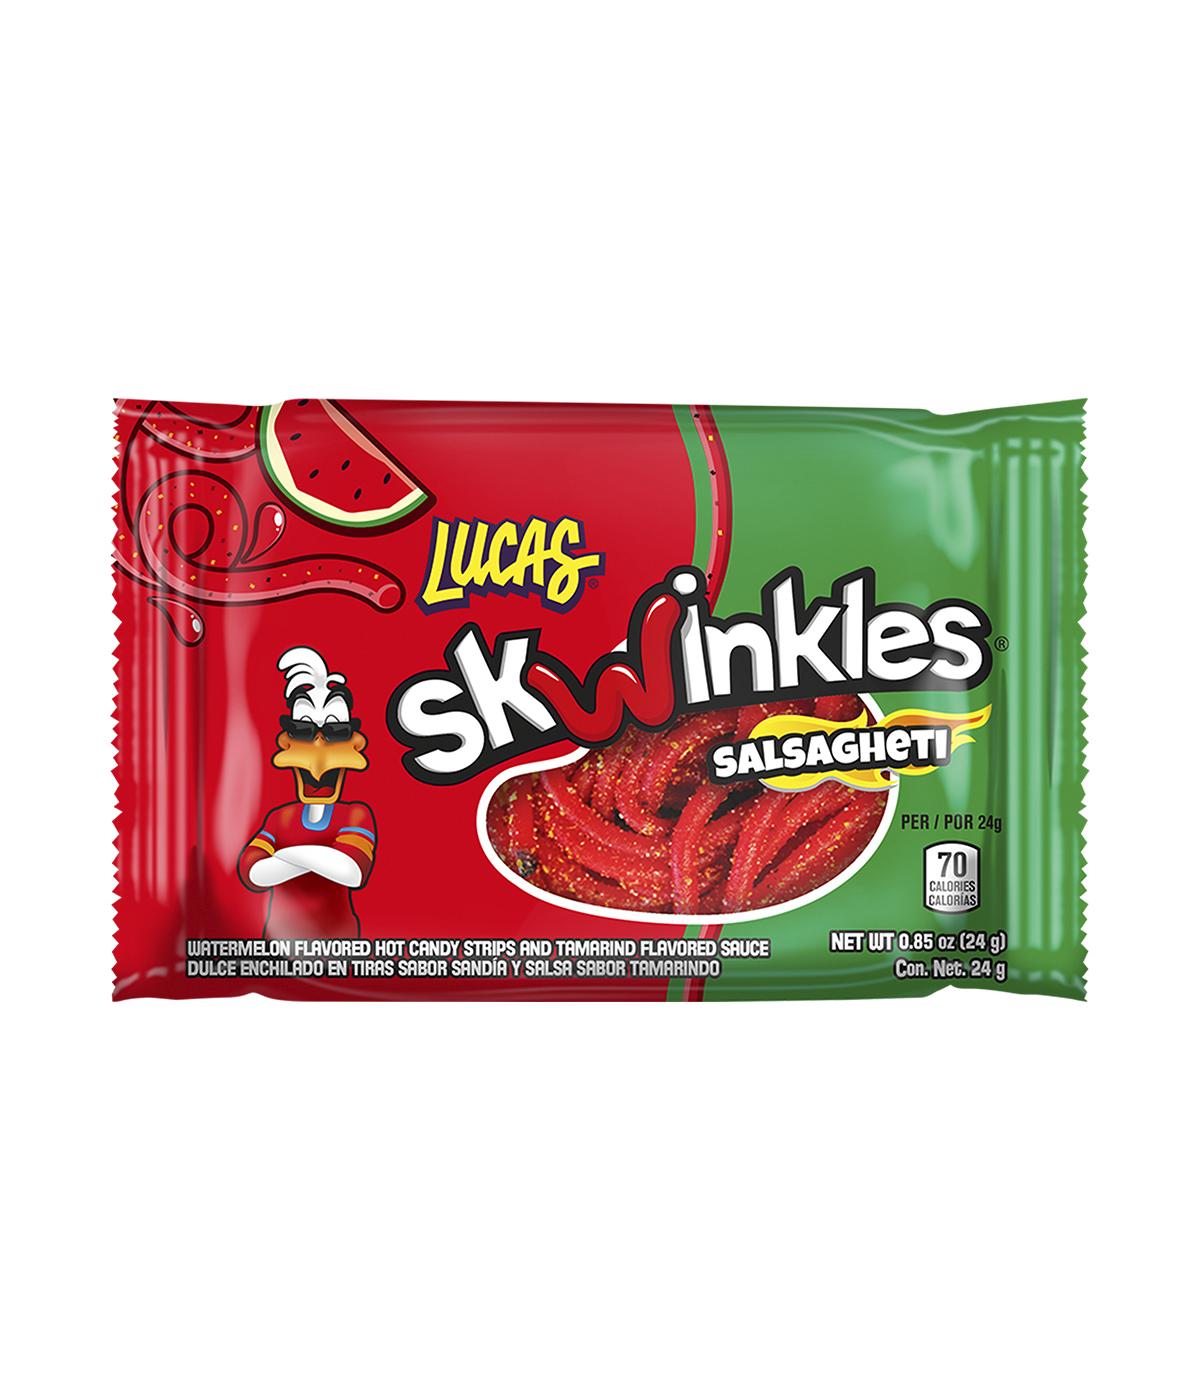 Lucas Skwinkles Salsagheti Watermelon Candy; image 1 of 2